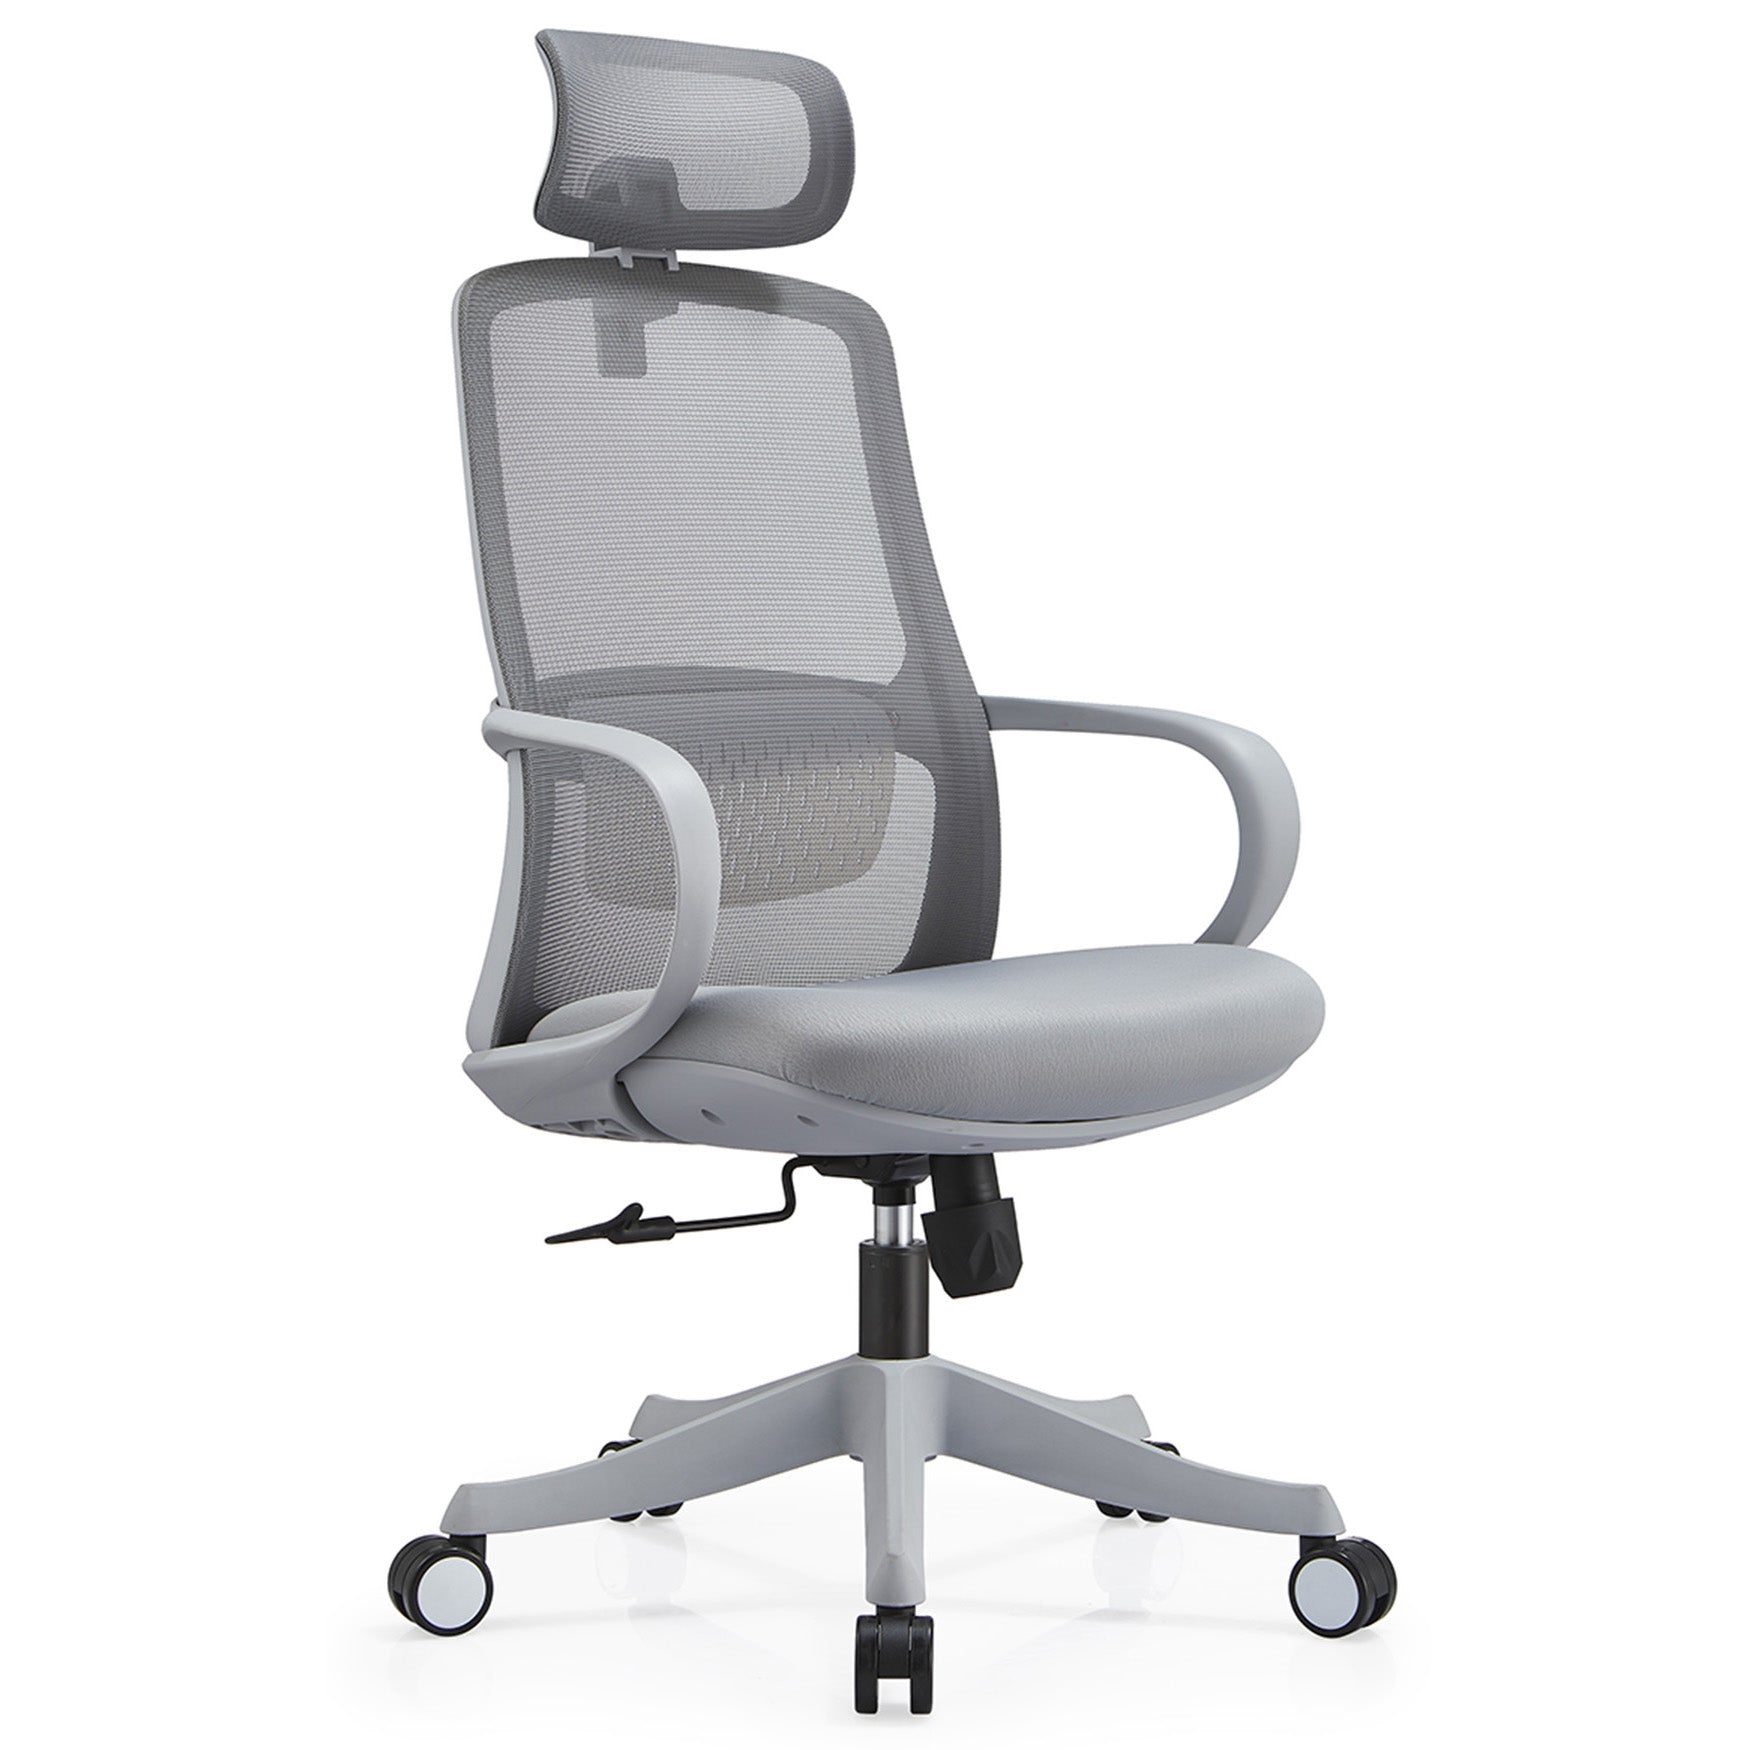 VOFFOV® Mesh Executive Swivel Chair with Headrest